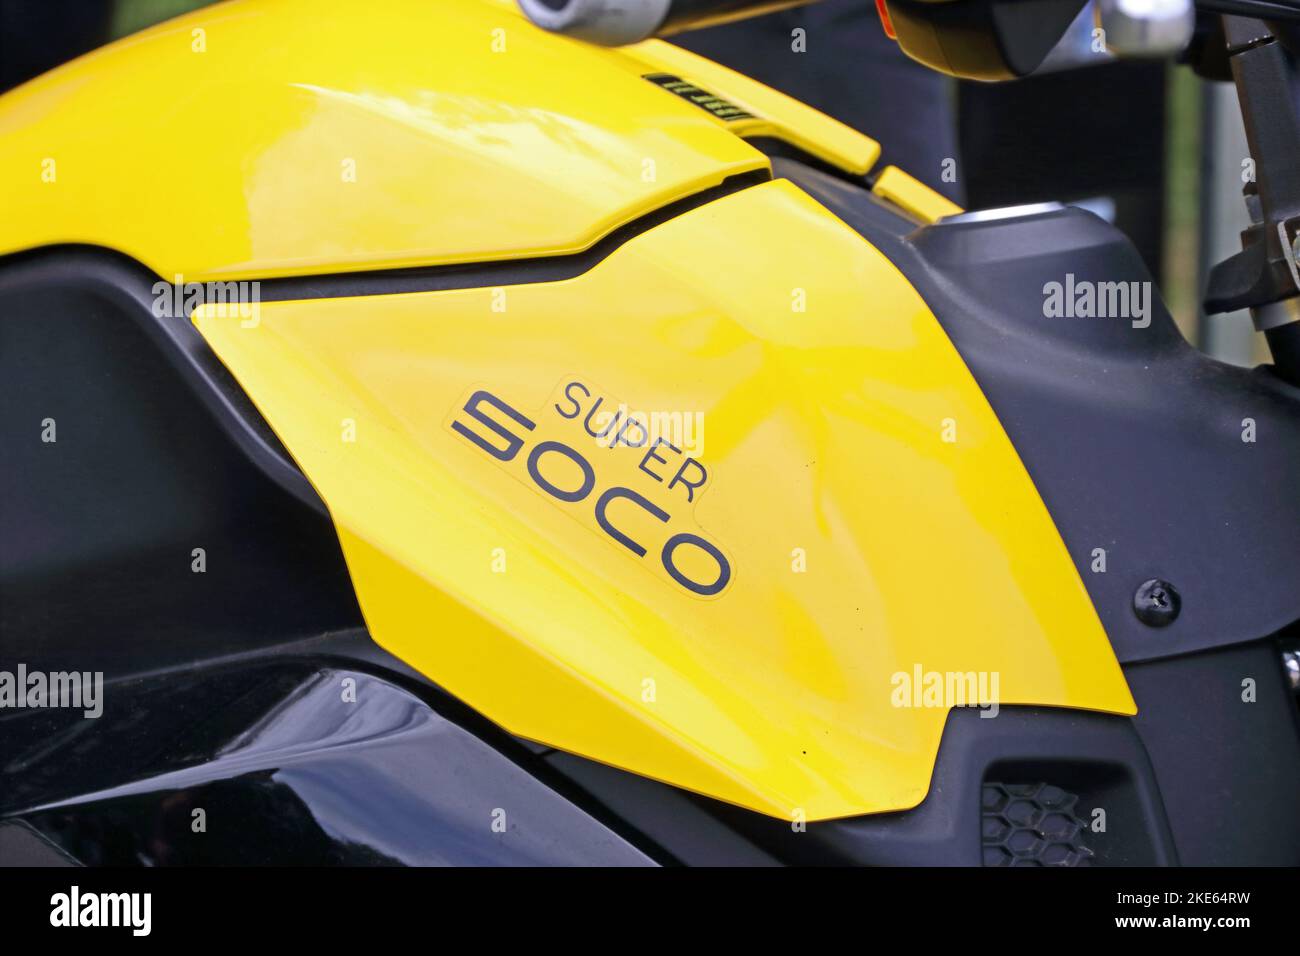 Super SOCO logo on side of electric motorcycle Stock Photo